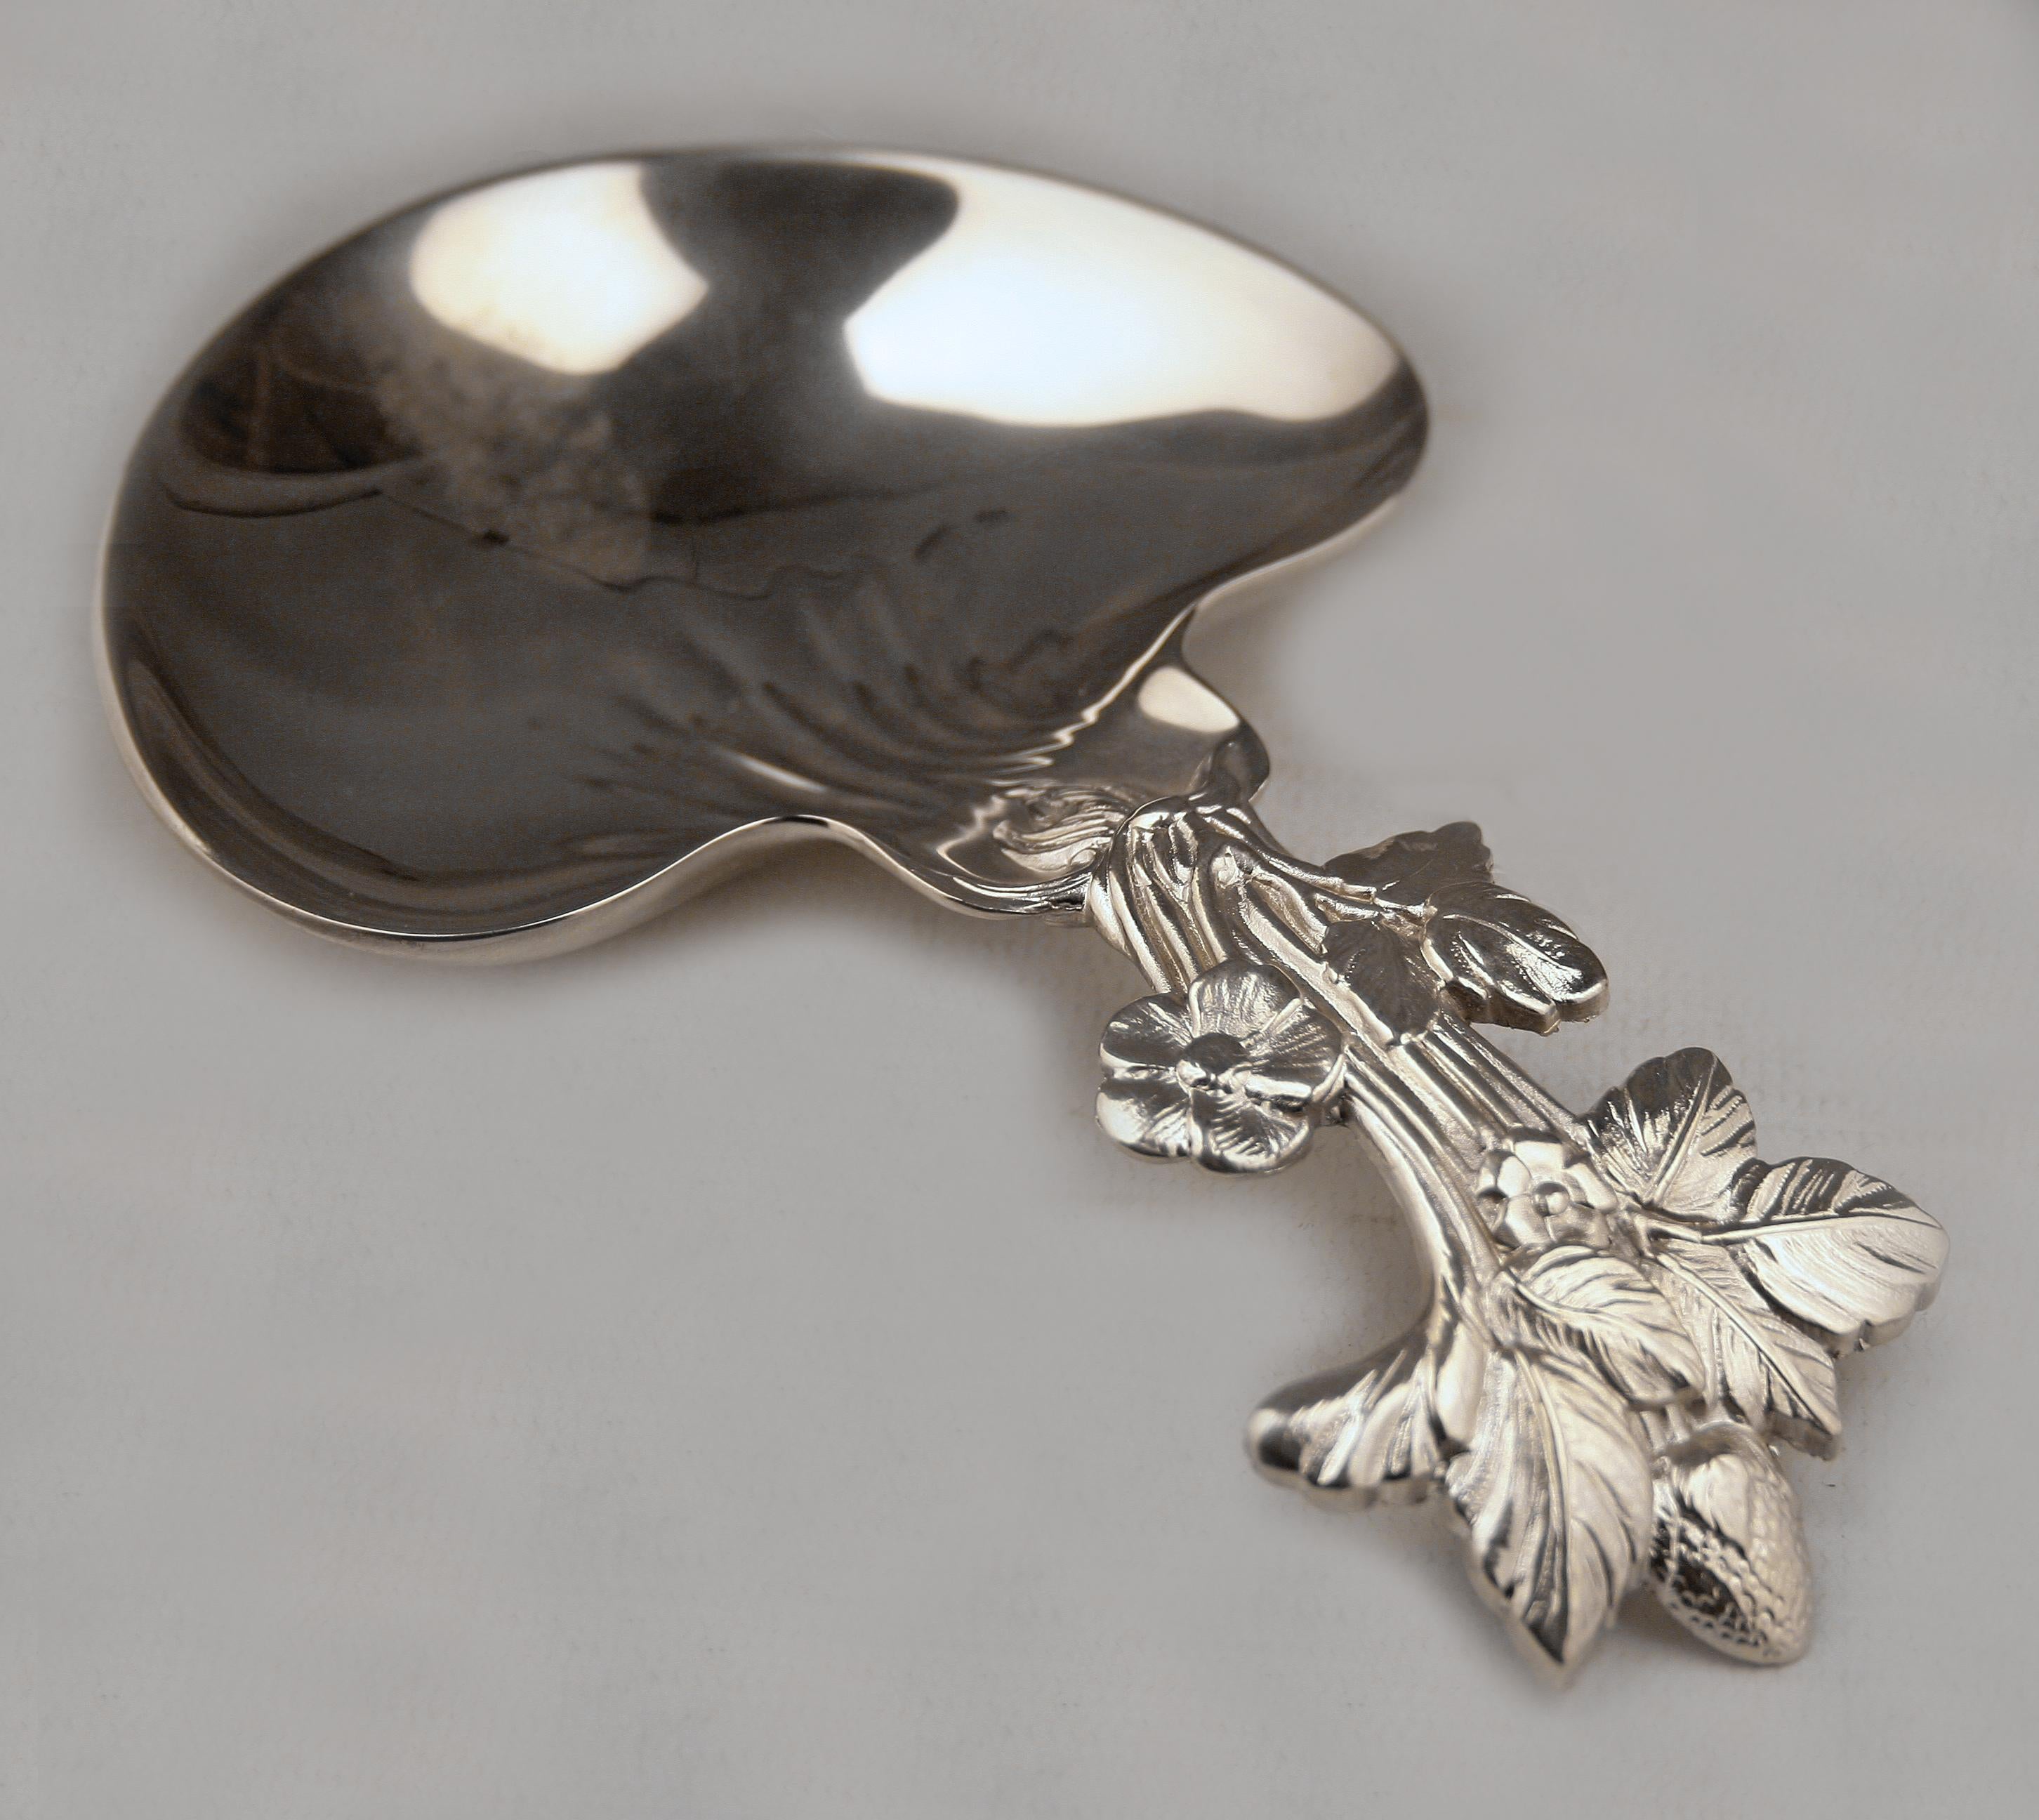 20th Century Art Nouveau French Silverplate Wine Tester Christofle's 'Paiva Strawberry Spoon' For Sale